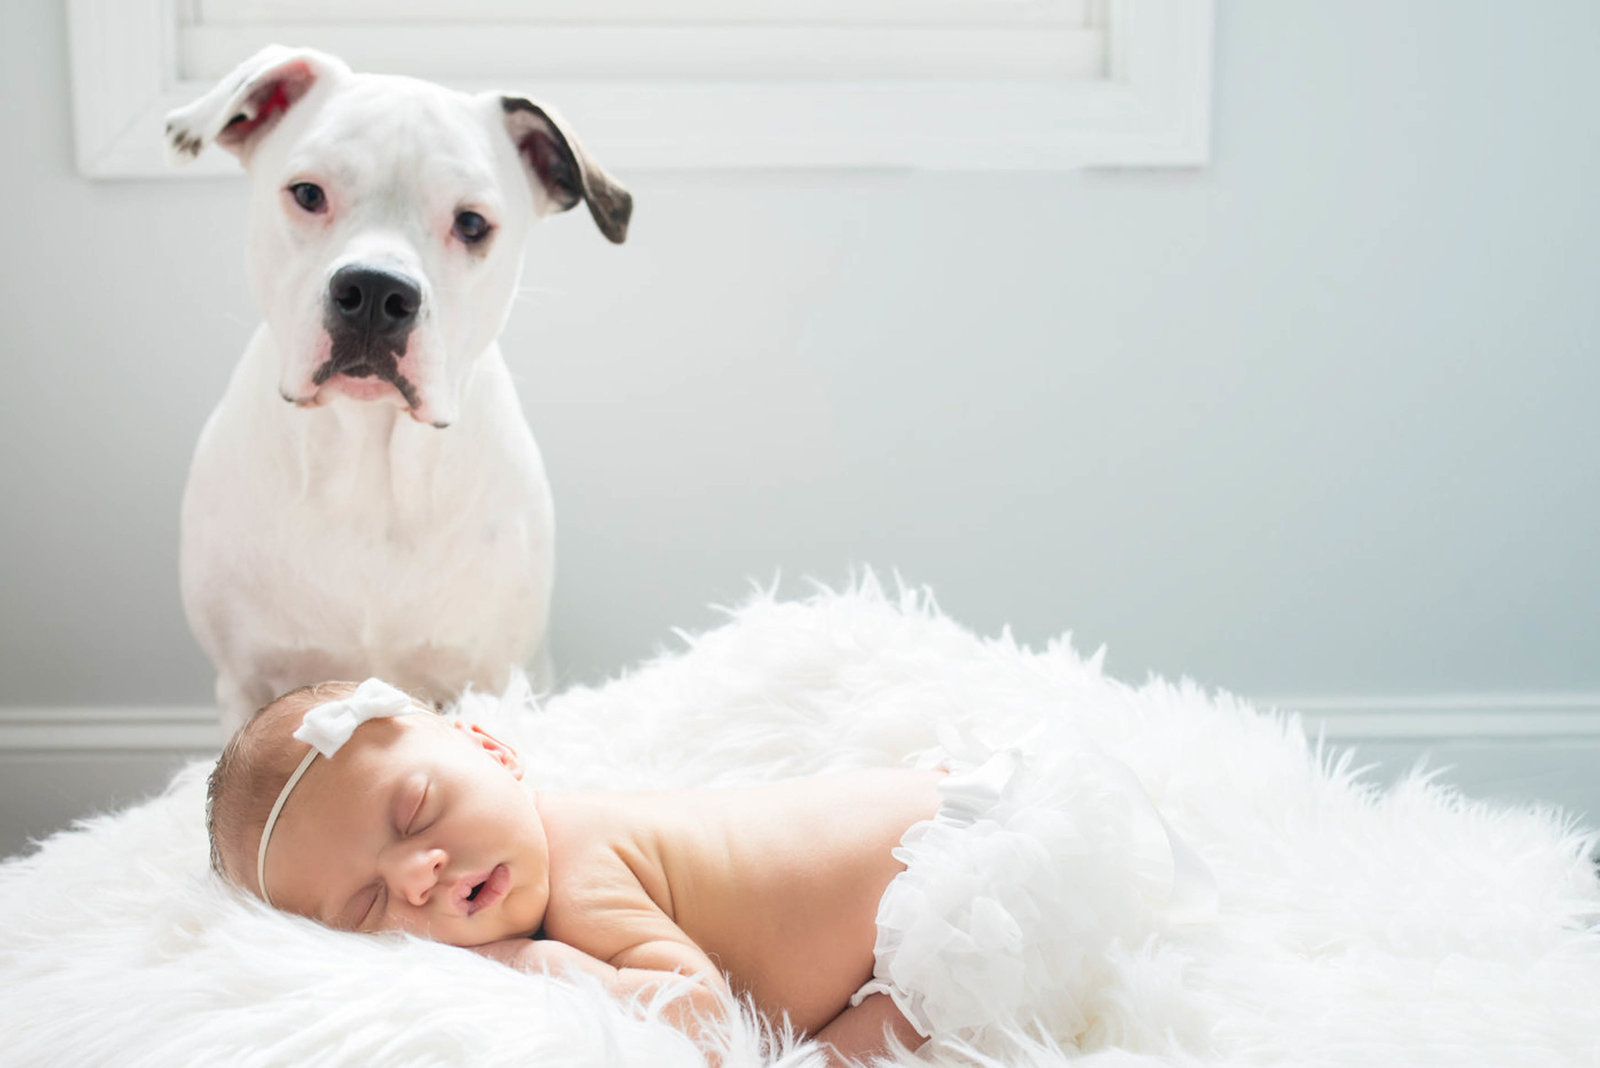 Dog watching over newborn during lifestyle session at home